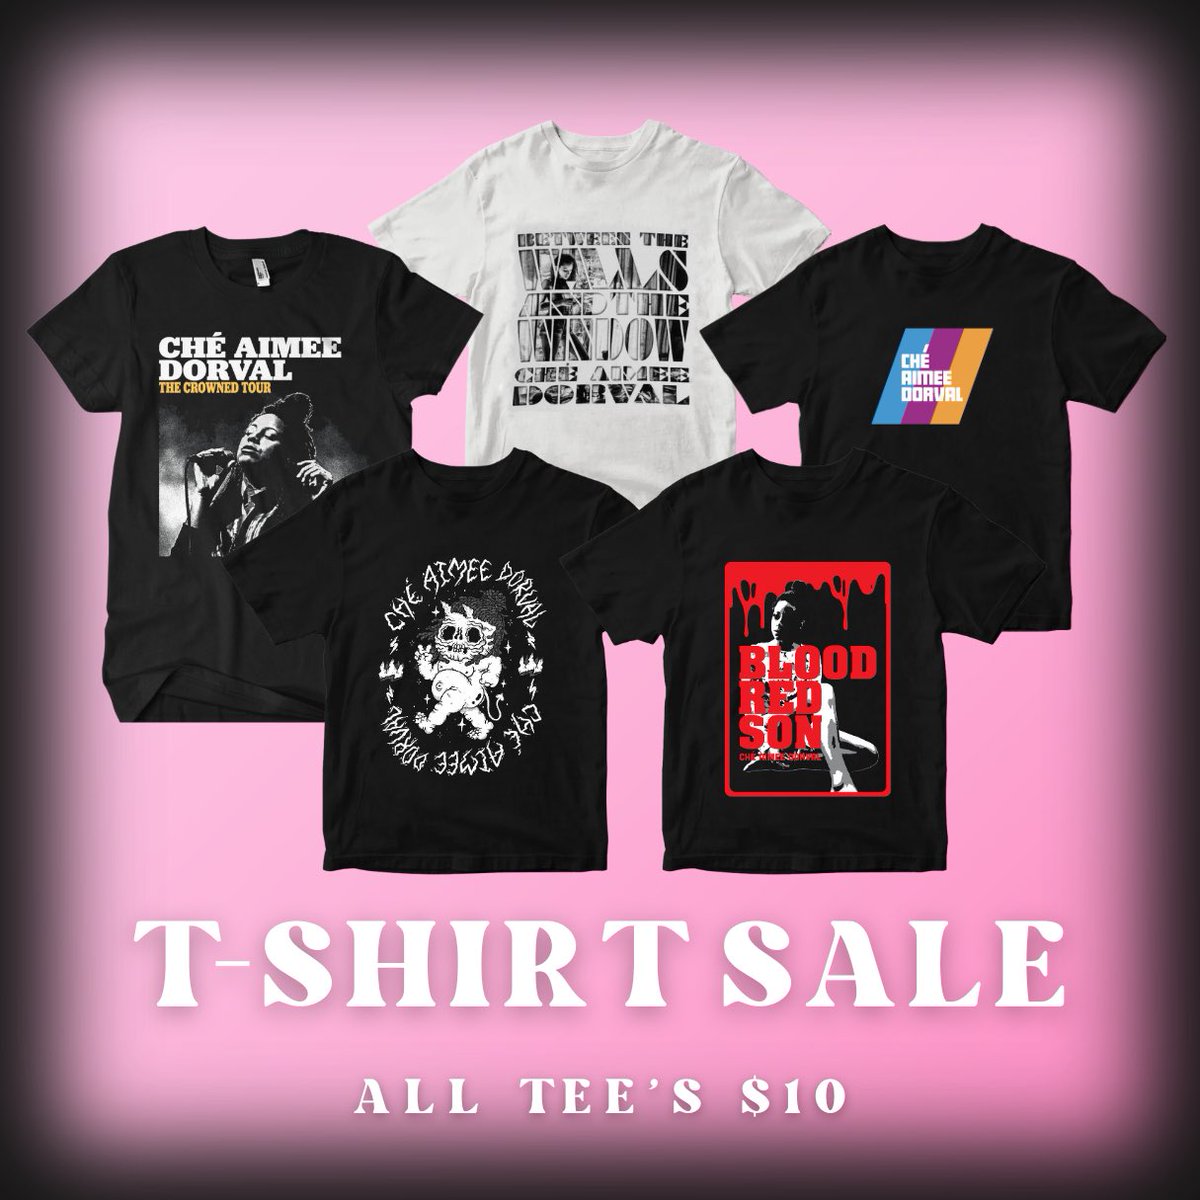 The shop's having a TSHIRT SALE! All tee's are $10 and there aren't many left so git em cheap while you can🖤 cheaimeedorval.com/shop #sale #merch #cheaimeedorval #bandmerch #thecrowned #betweenthewallsandthewindow